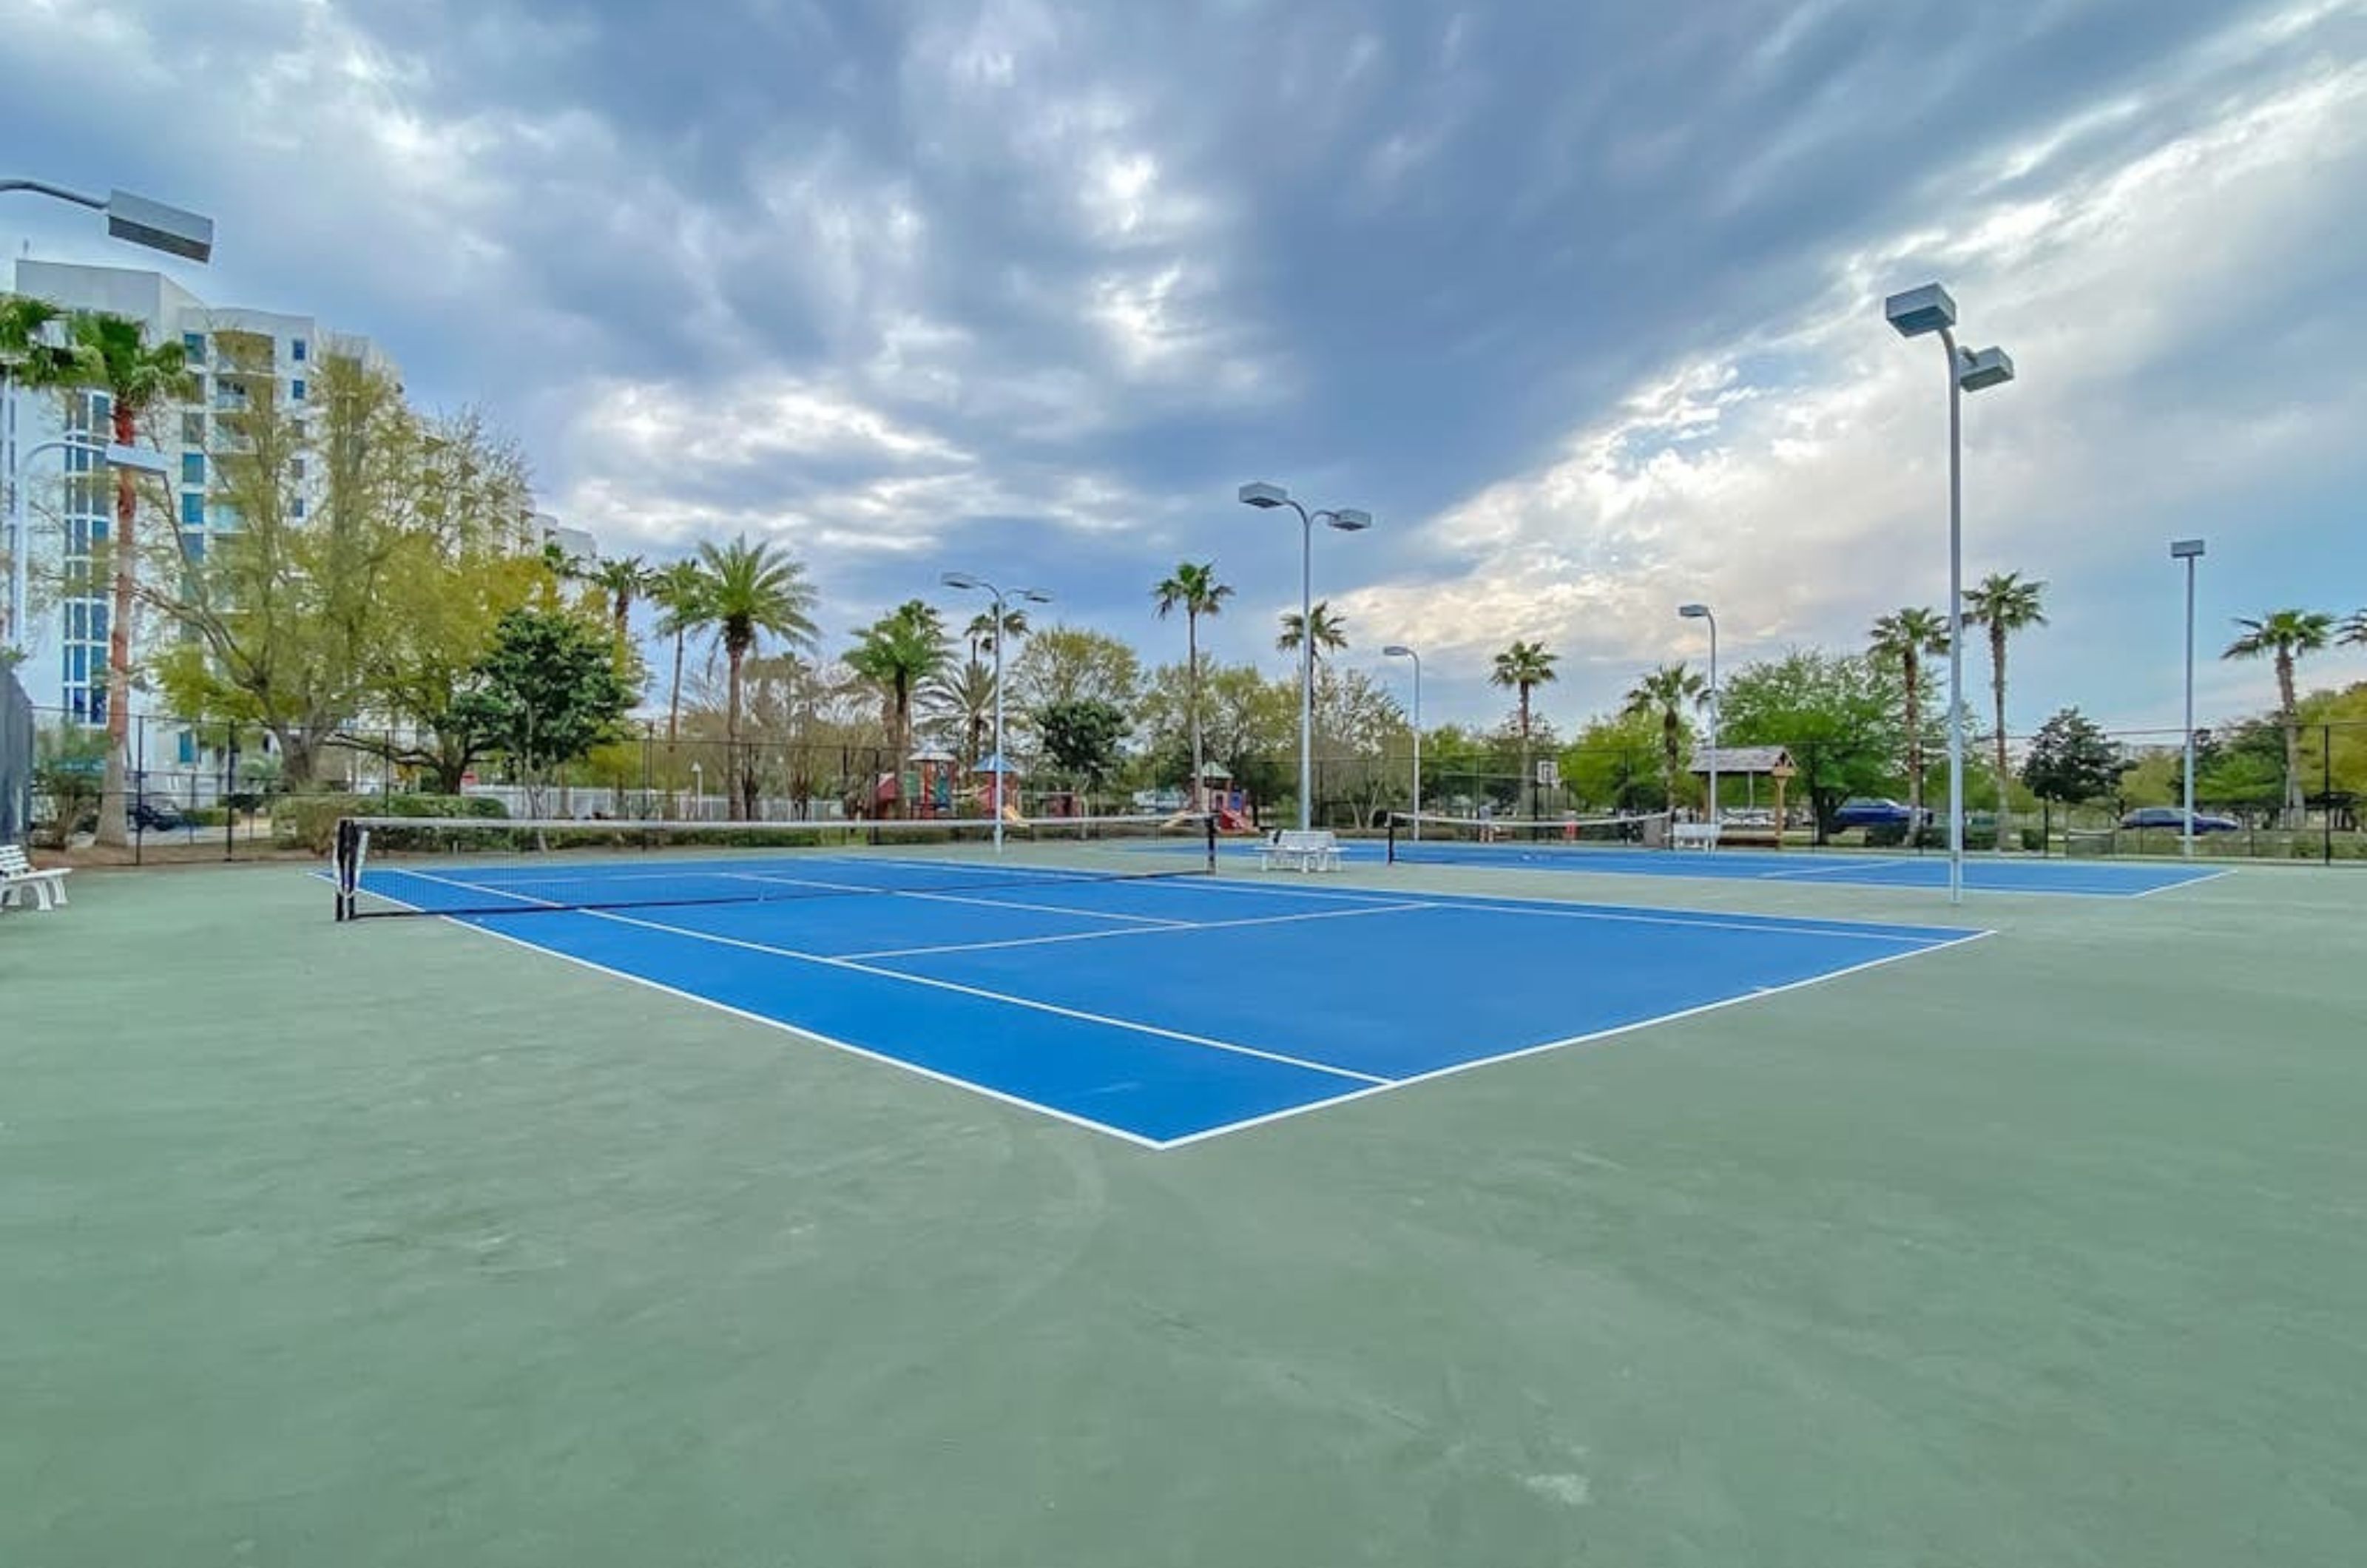 The outdoor tennis courts at the Palms of Destin in Destin Florida	